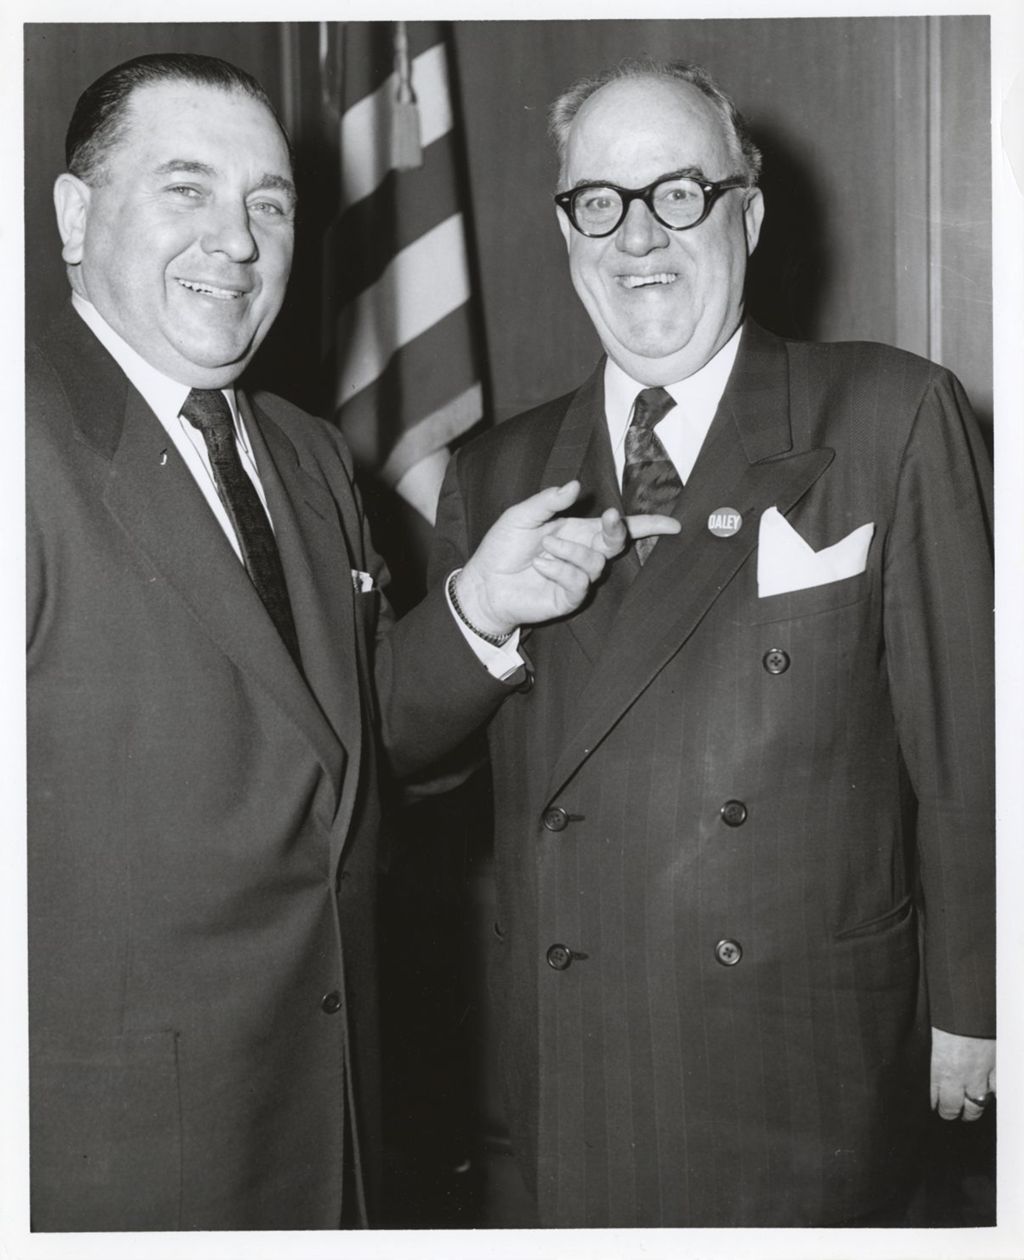 Miniature of Richard J. Daley, 1959 mayoral campaign